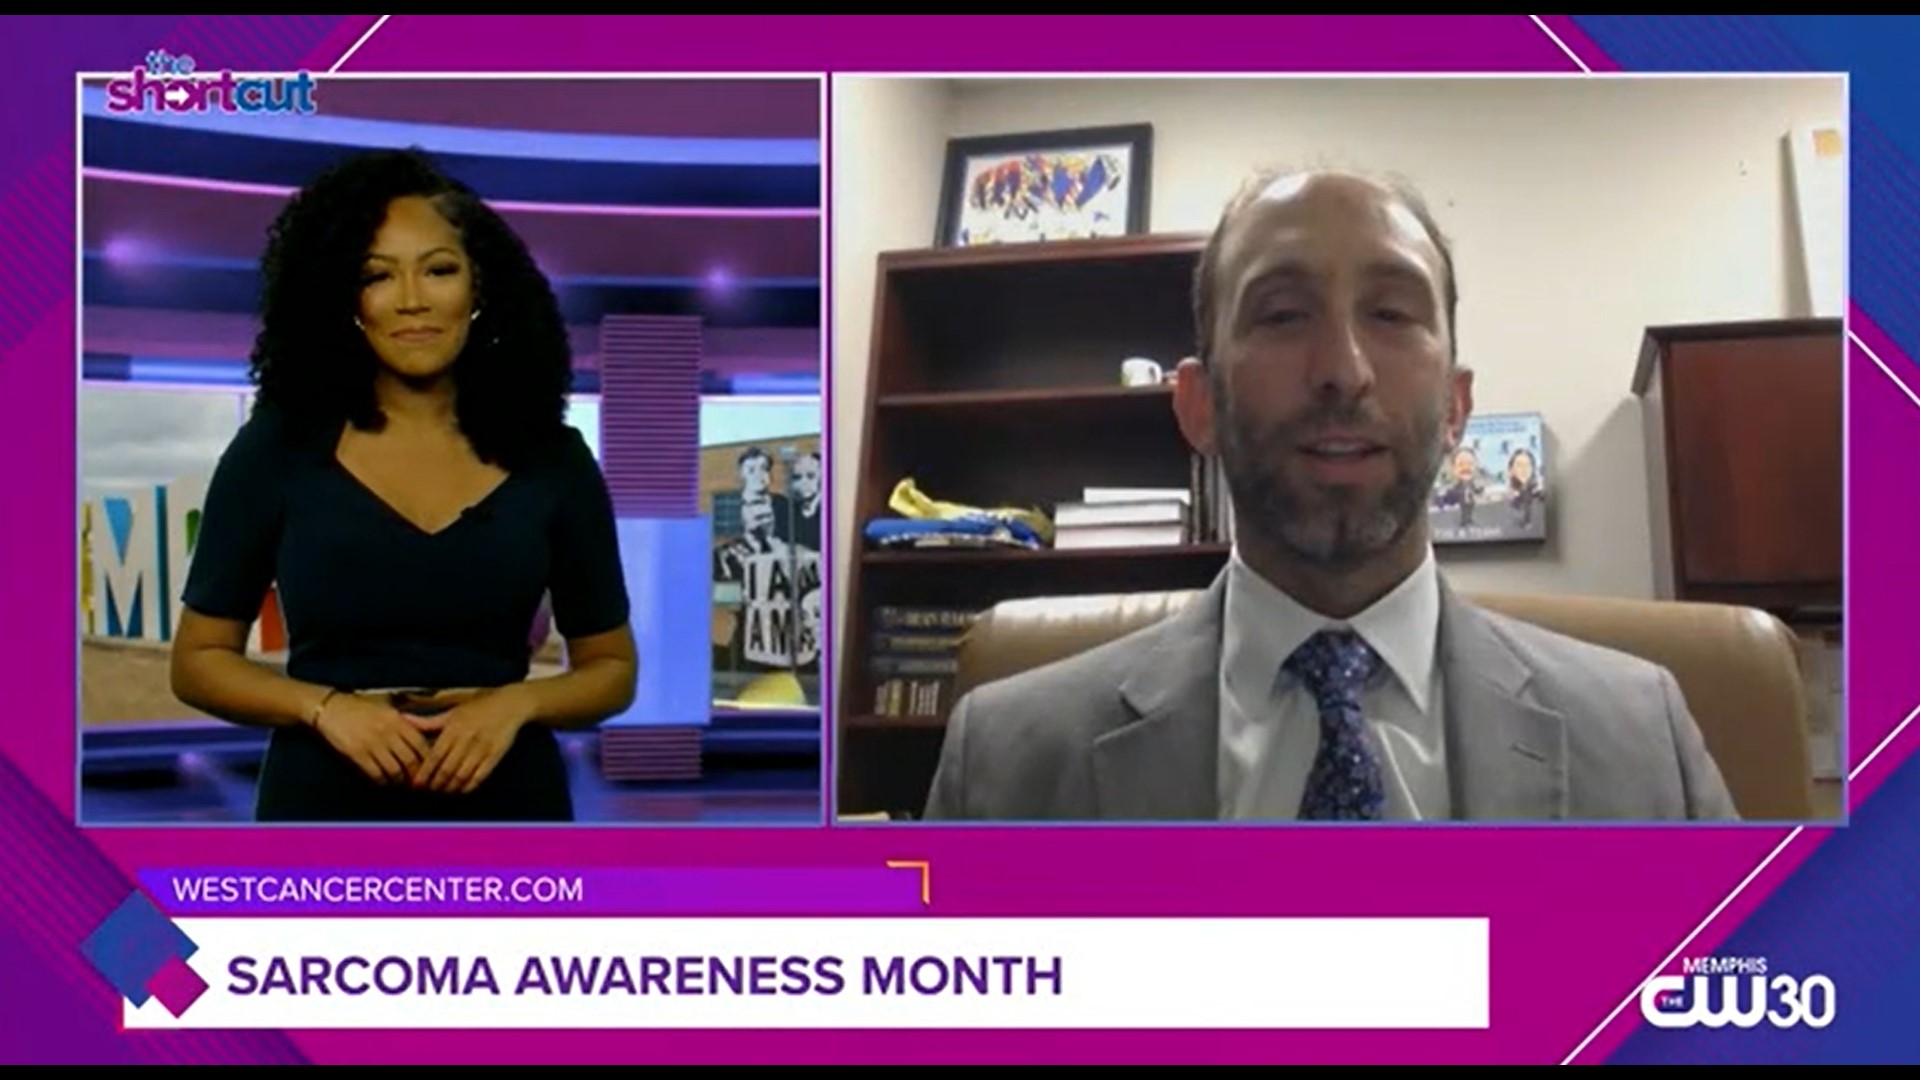 In honor of Sarcoma Awareness Month, get the facts behind these rare forms of cancer from West Cancer Clinic's Dr. David Portnoy and host Sydney Neely!